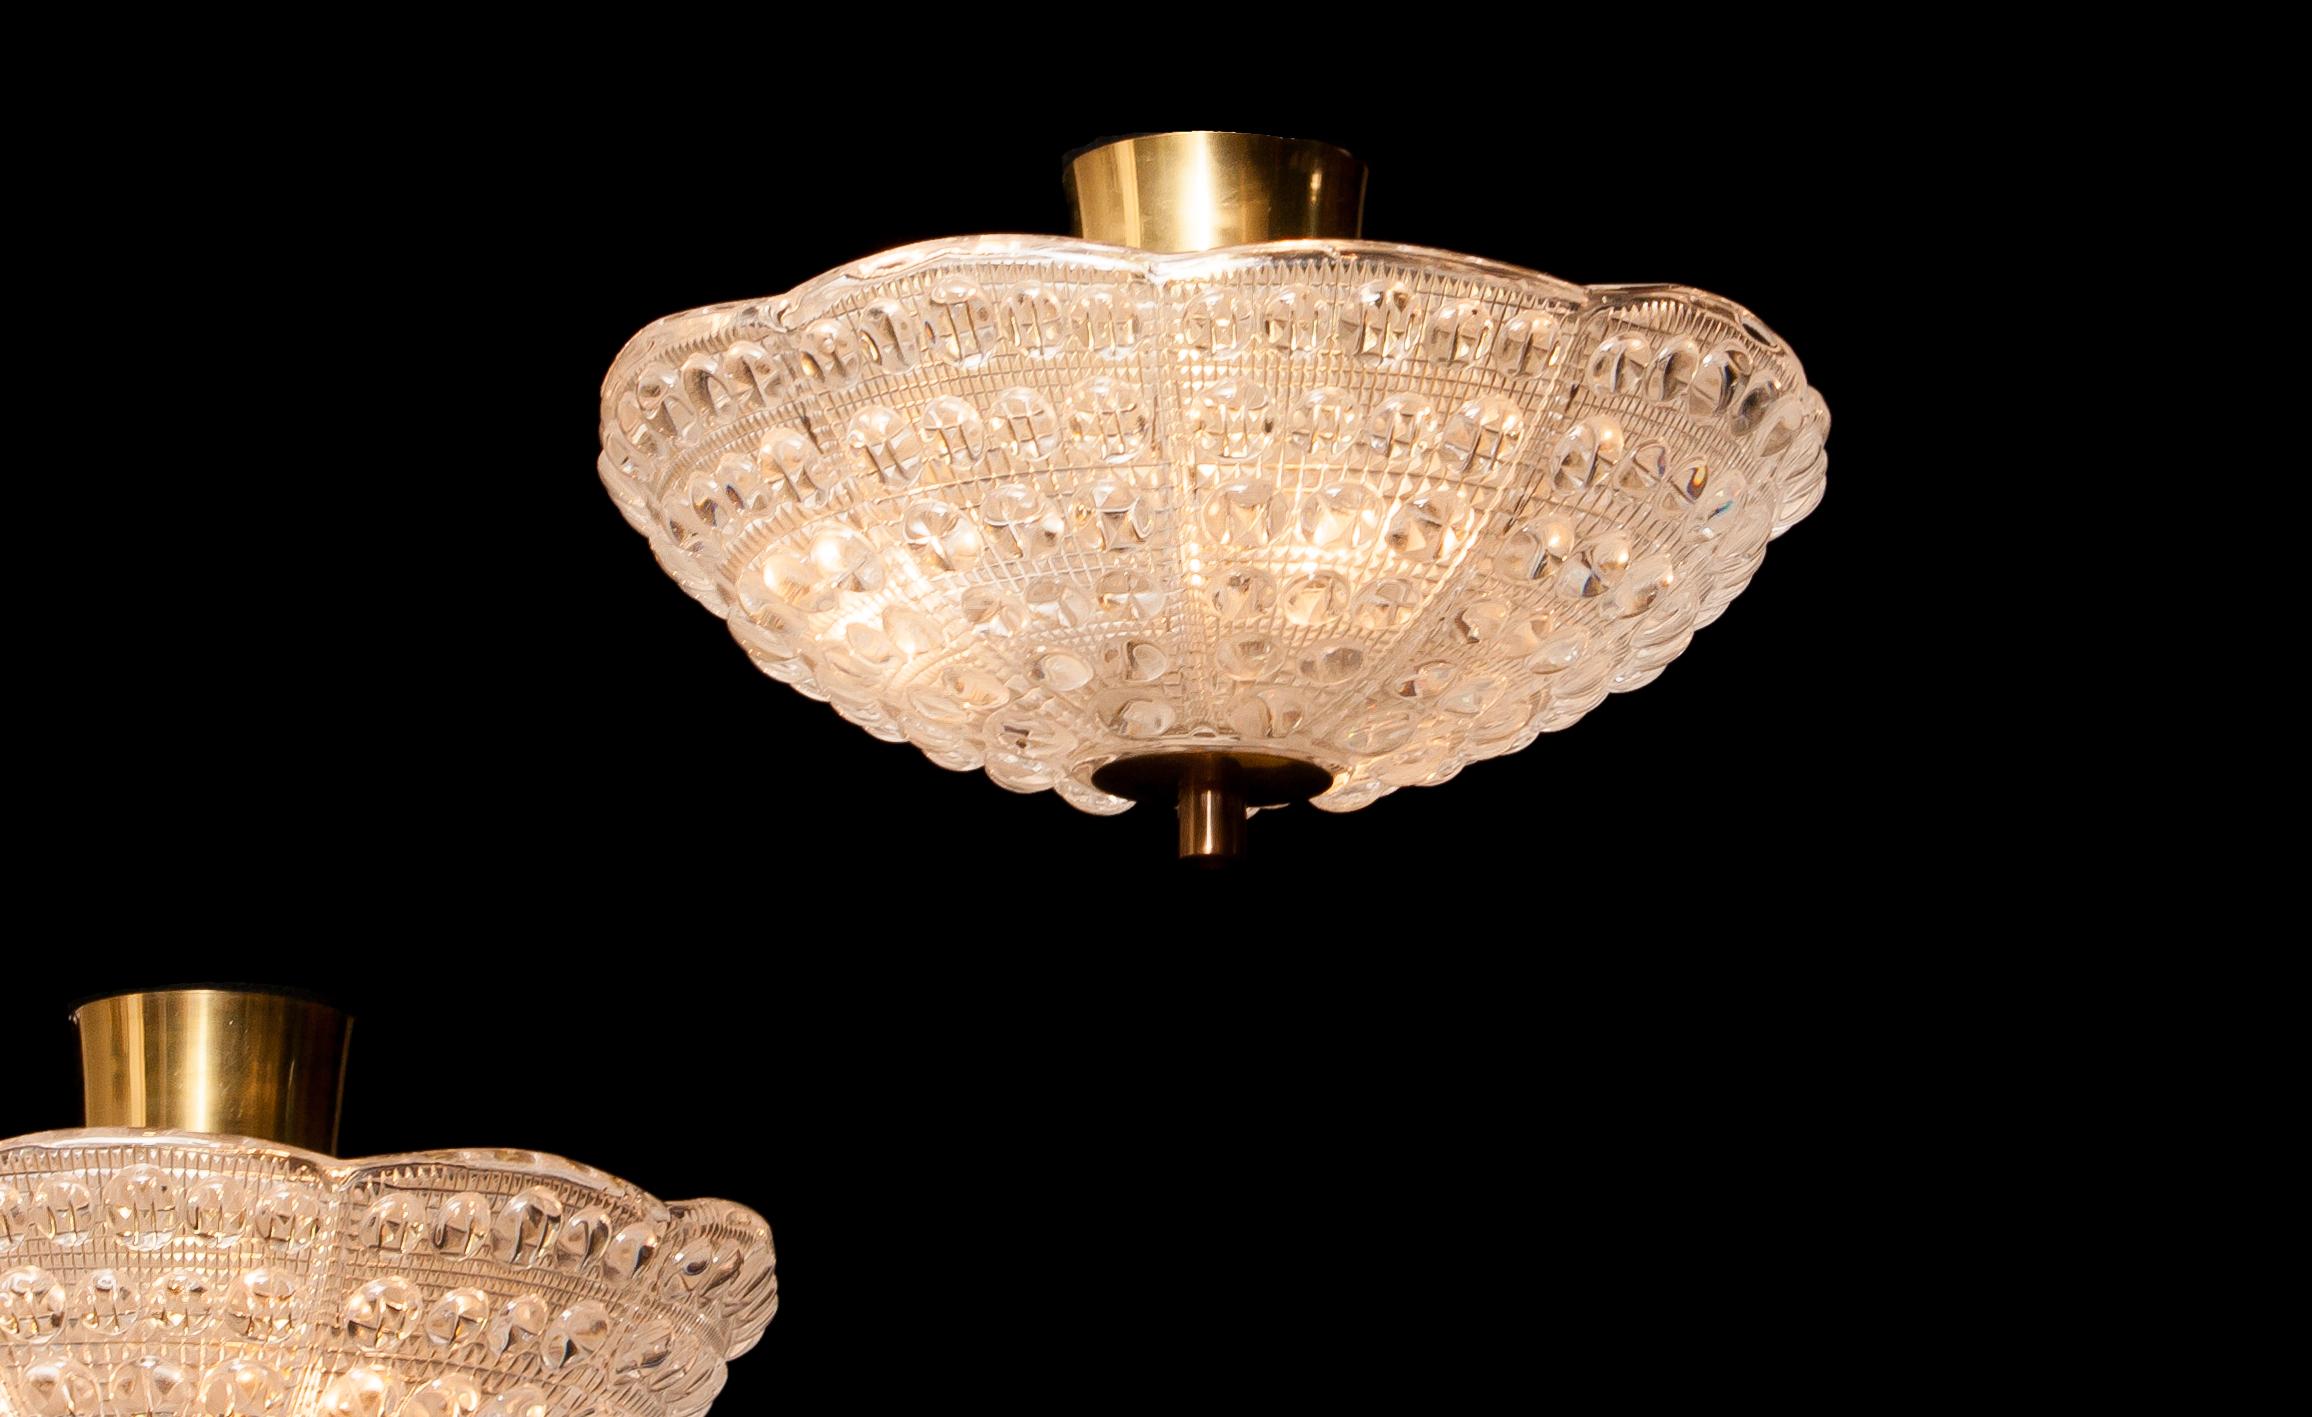 Pair of Crystal and Brass Ceiling Lights by Carl Fagerlund for Orrefors, 1960s (Schwedisch)